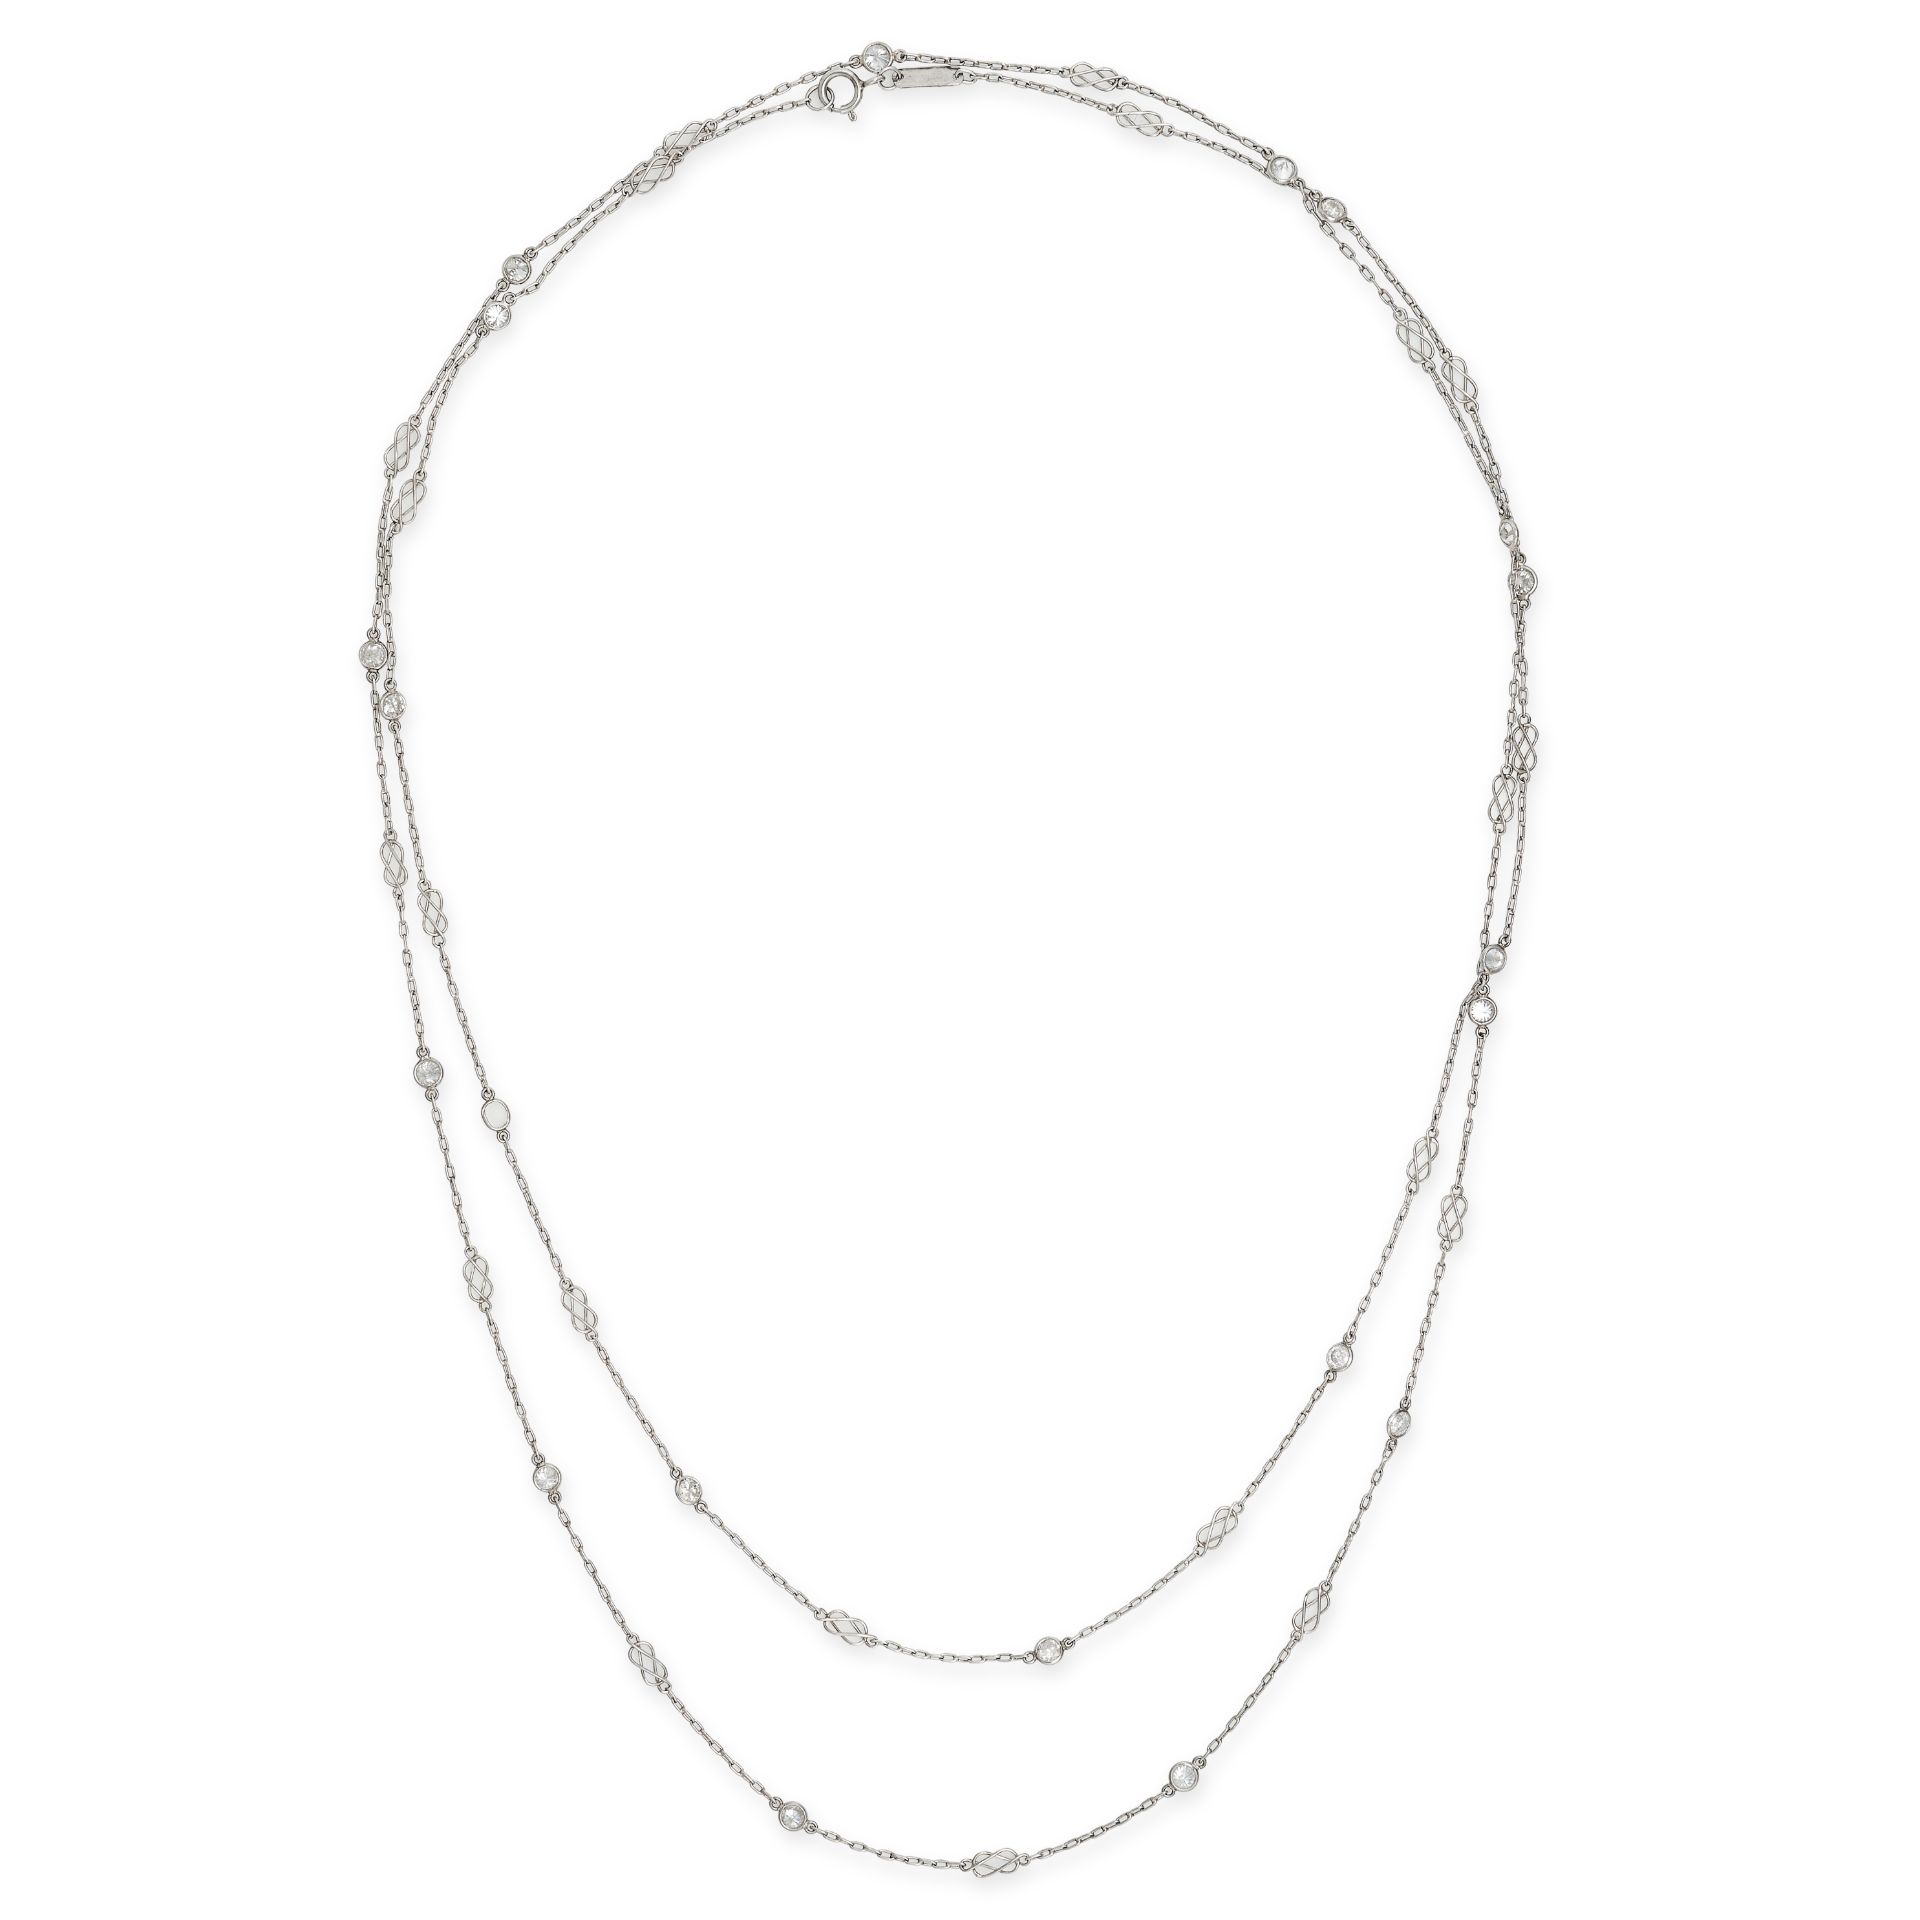 A DIAMOND SAUTOIR NECKLACE in platinum, the chain set with alternating round cut diamonds and lov...